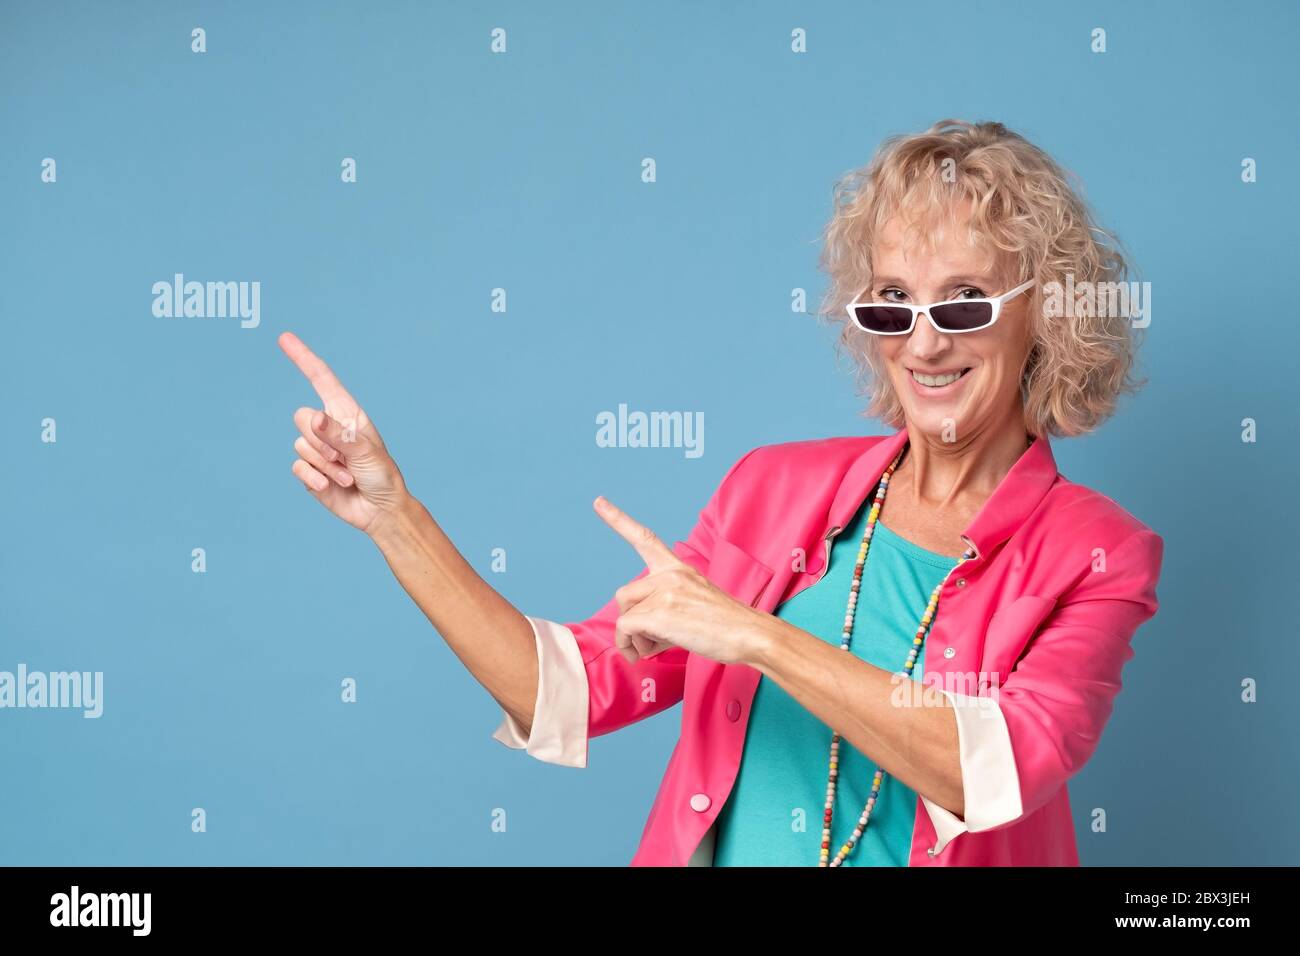 woman with sunglasses smiling cheerfully and pointing with forefingers away Stock Photo